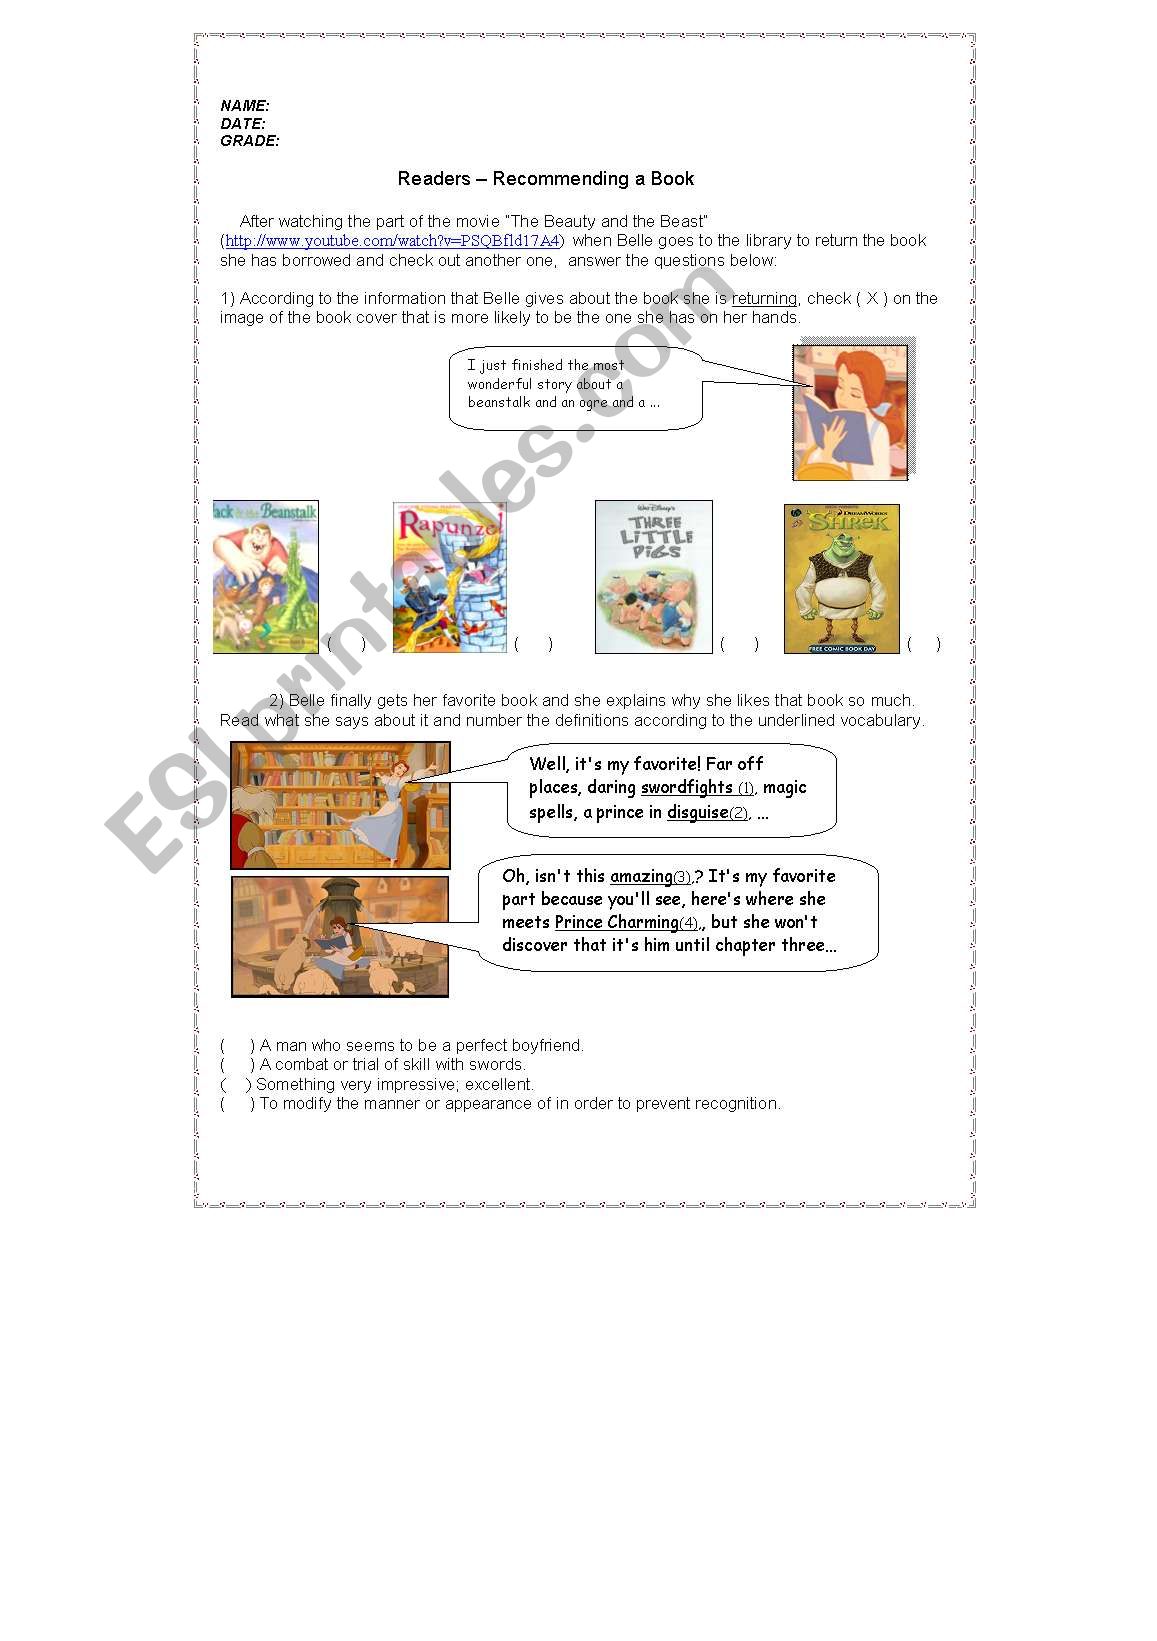 Recommending a Book - Readers worksheet